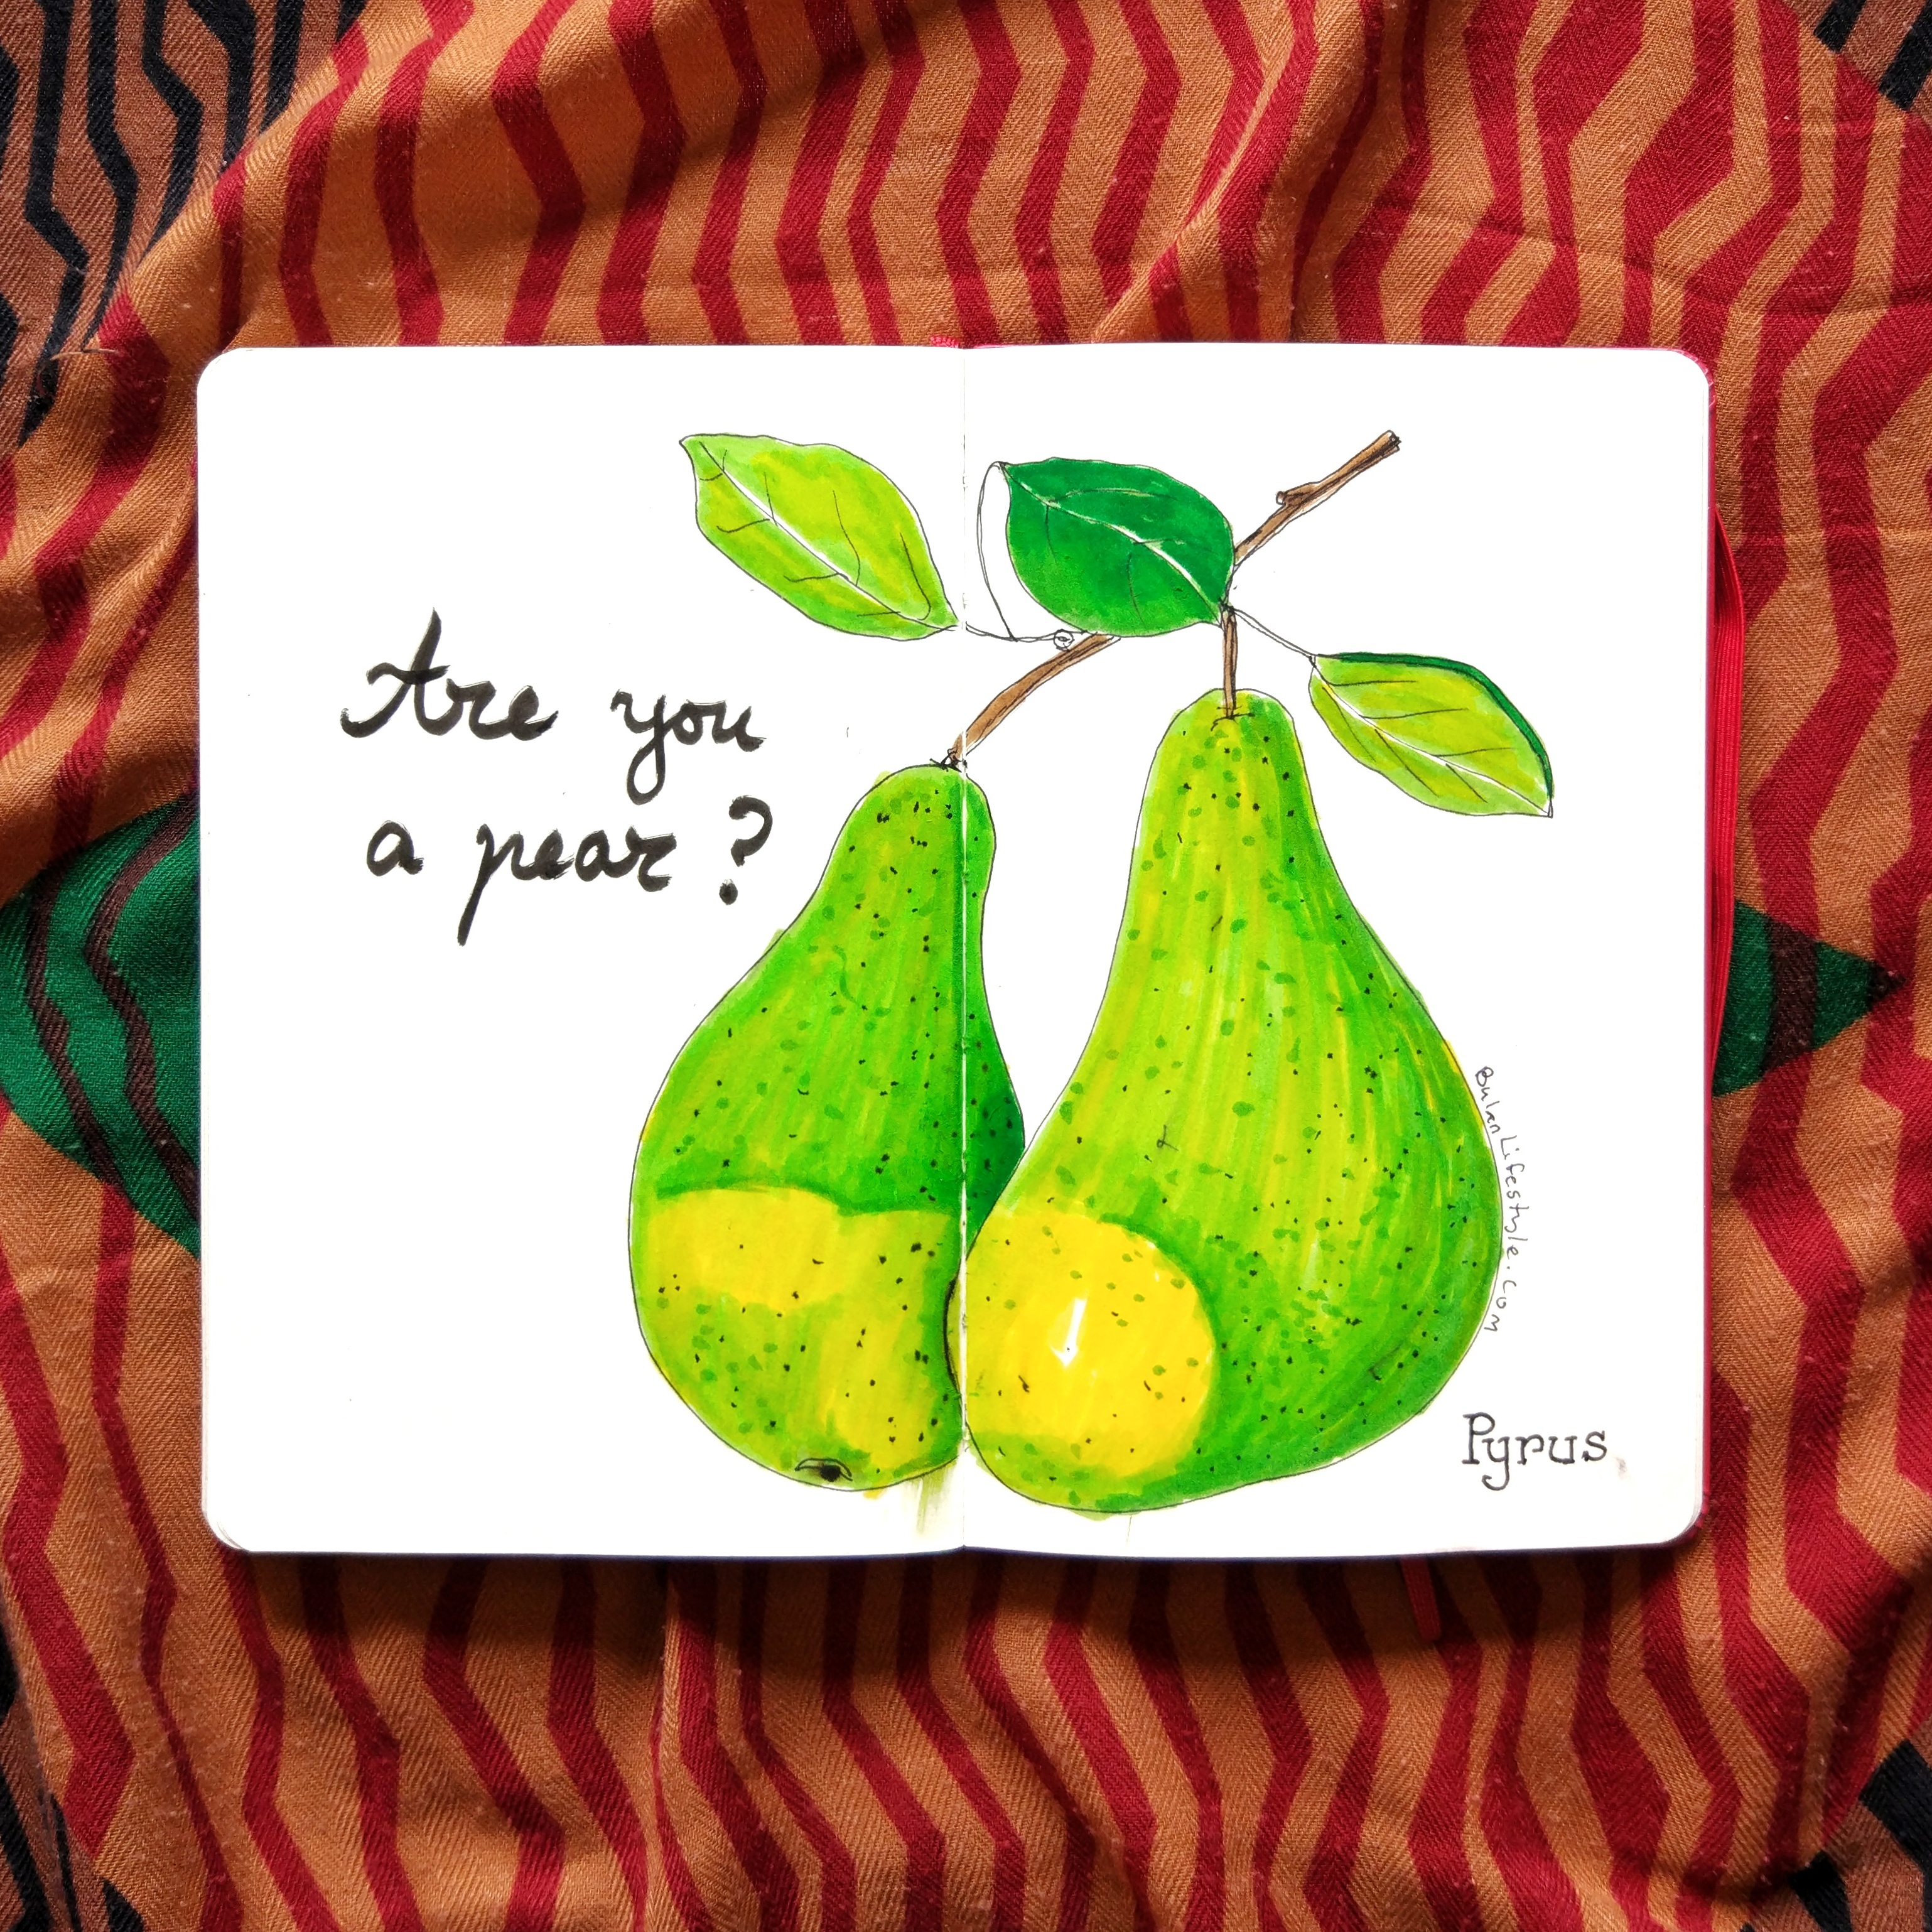 Are you a pear